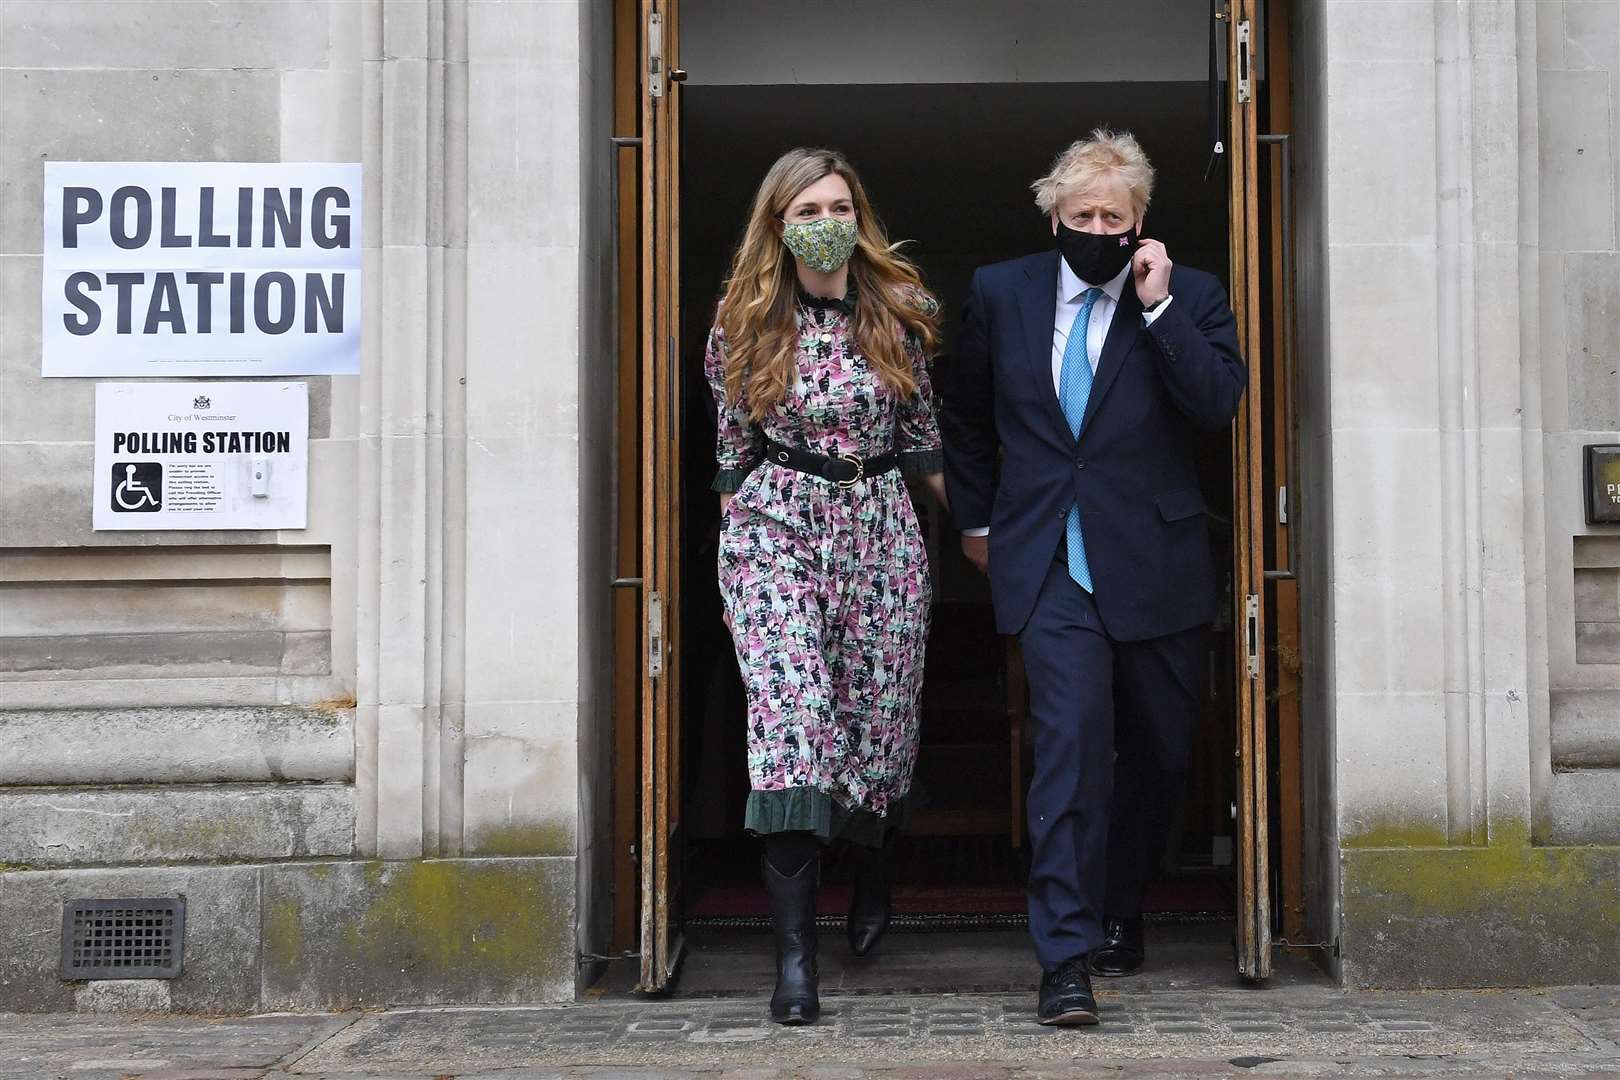 Prime Minister Boris Johnson and his fiancee Carrie Symonds leave after casting their vote at Methodist Central Hall, Westminster (Stefan Rousseau/PA)